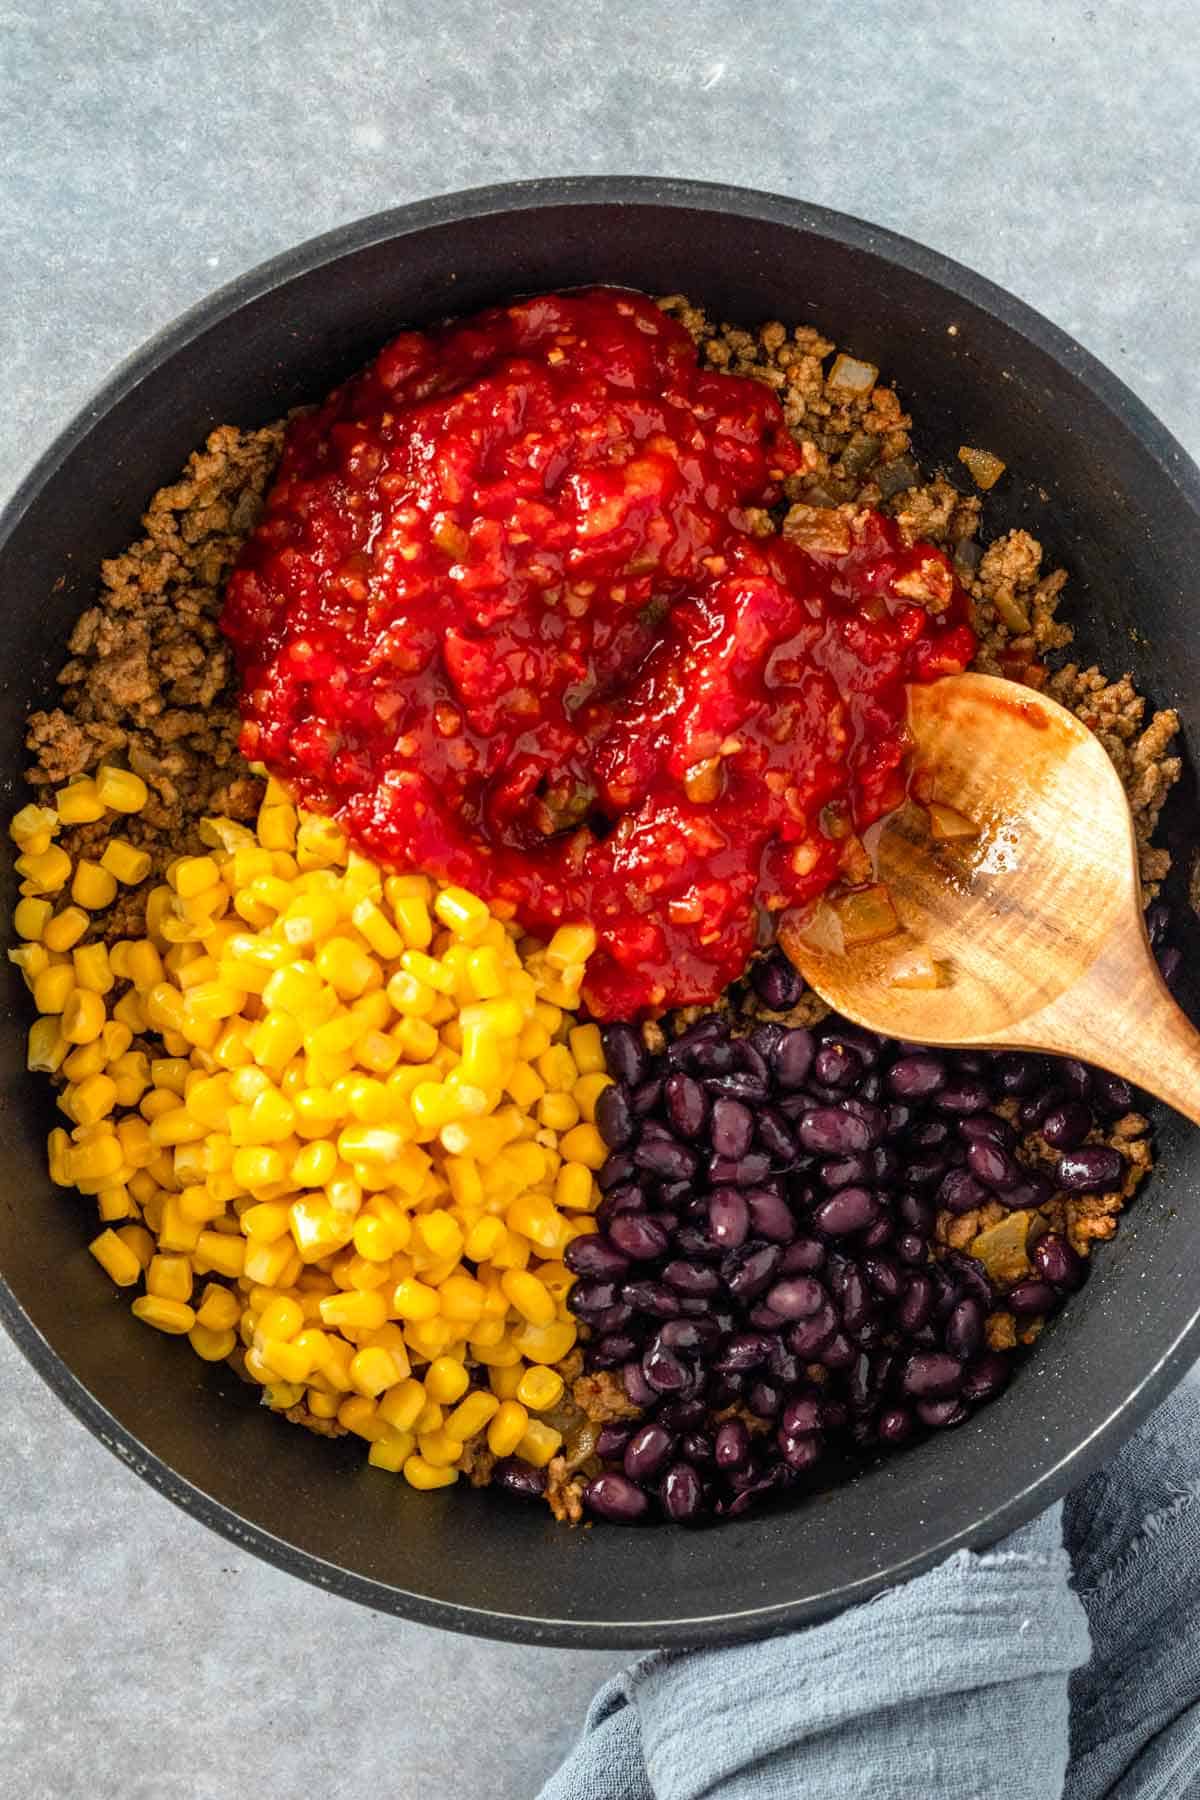 tomato sauce, corn, black beans and ground beef in skillet before cooking